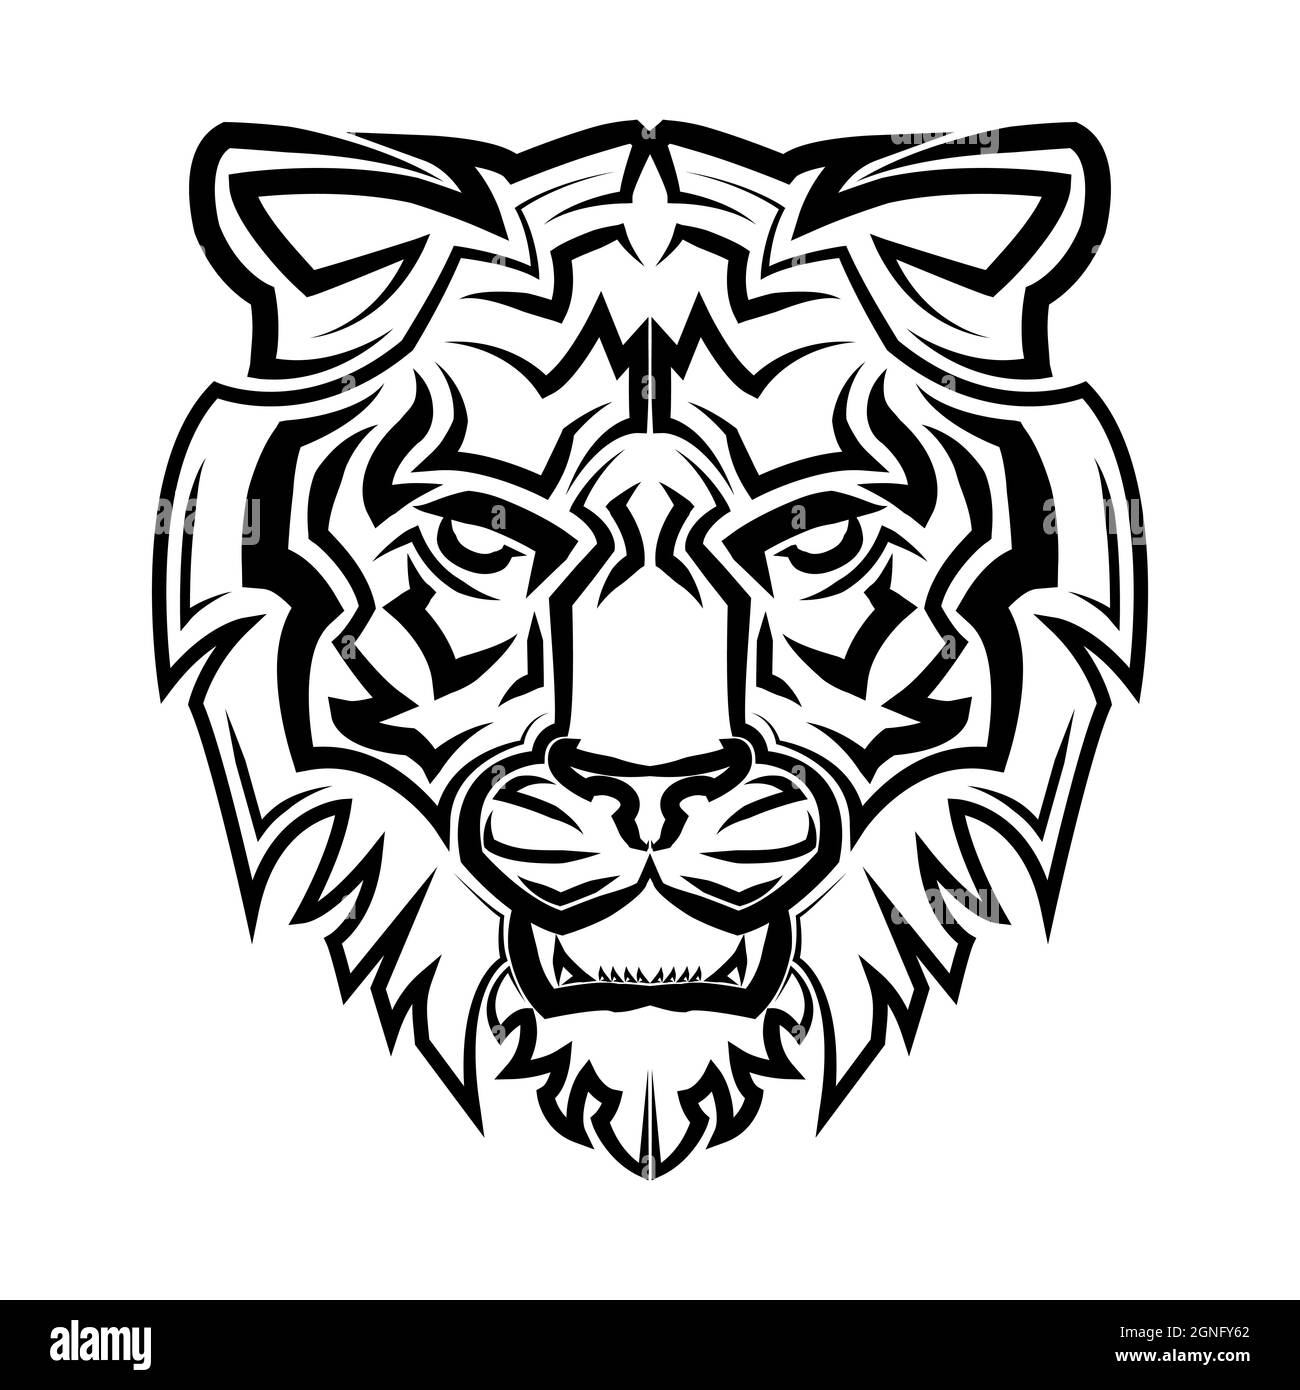 Tiger Line Art Drawing Black And White Tattoo Art | Tapestry